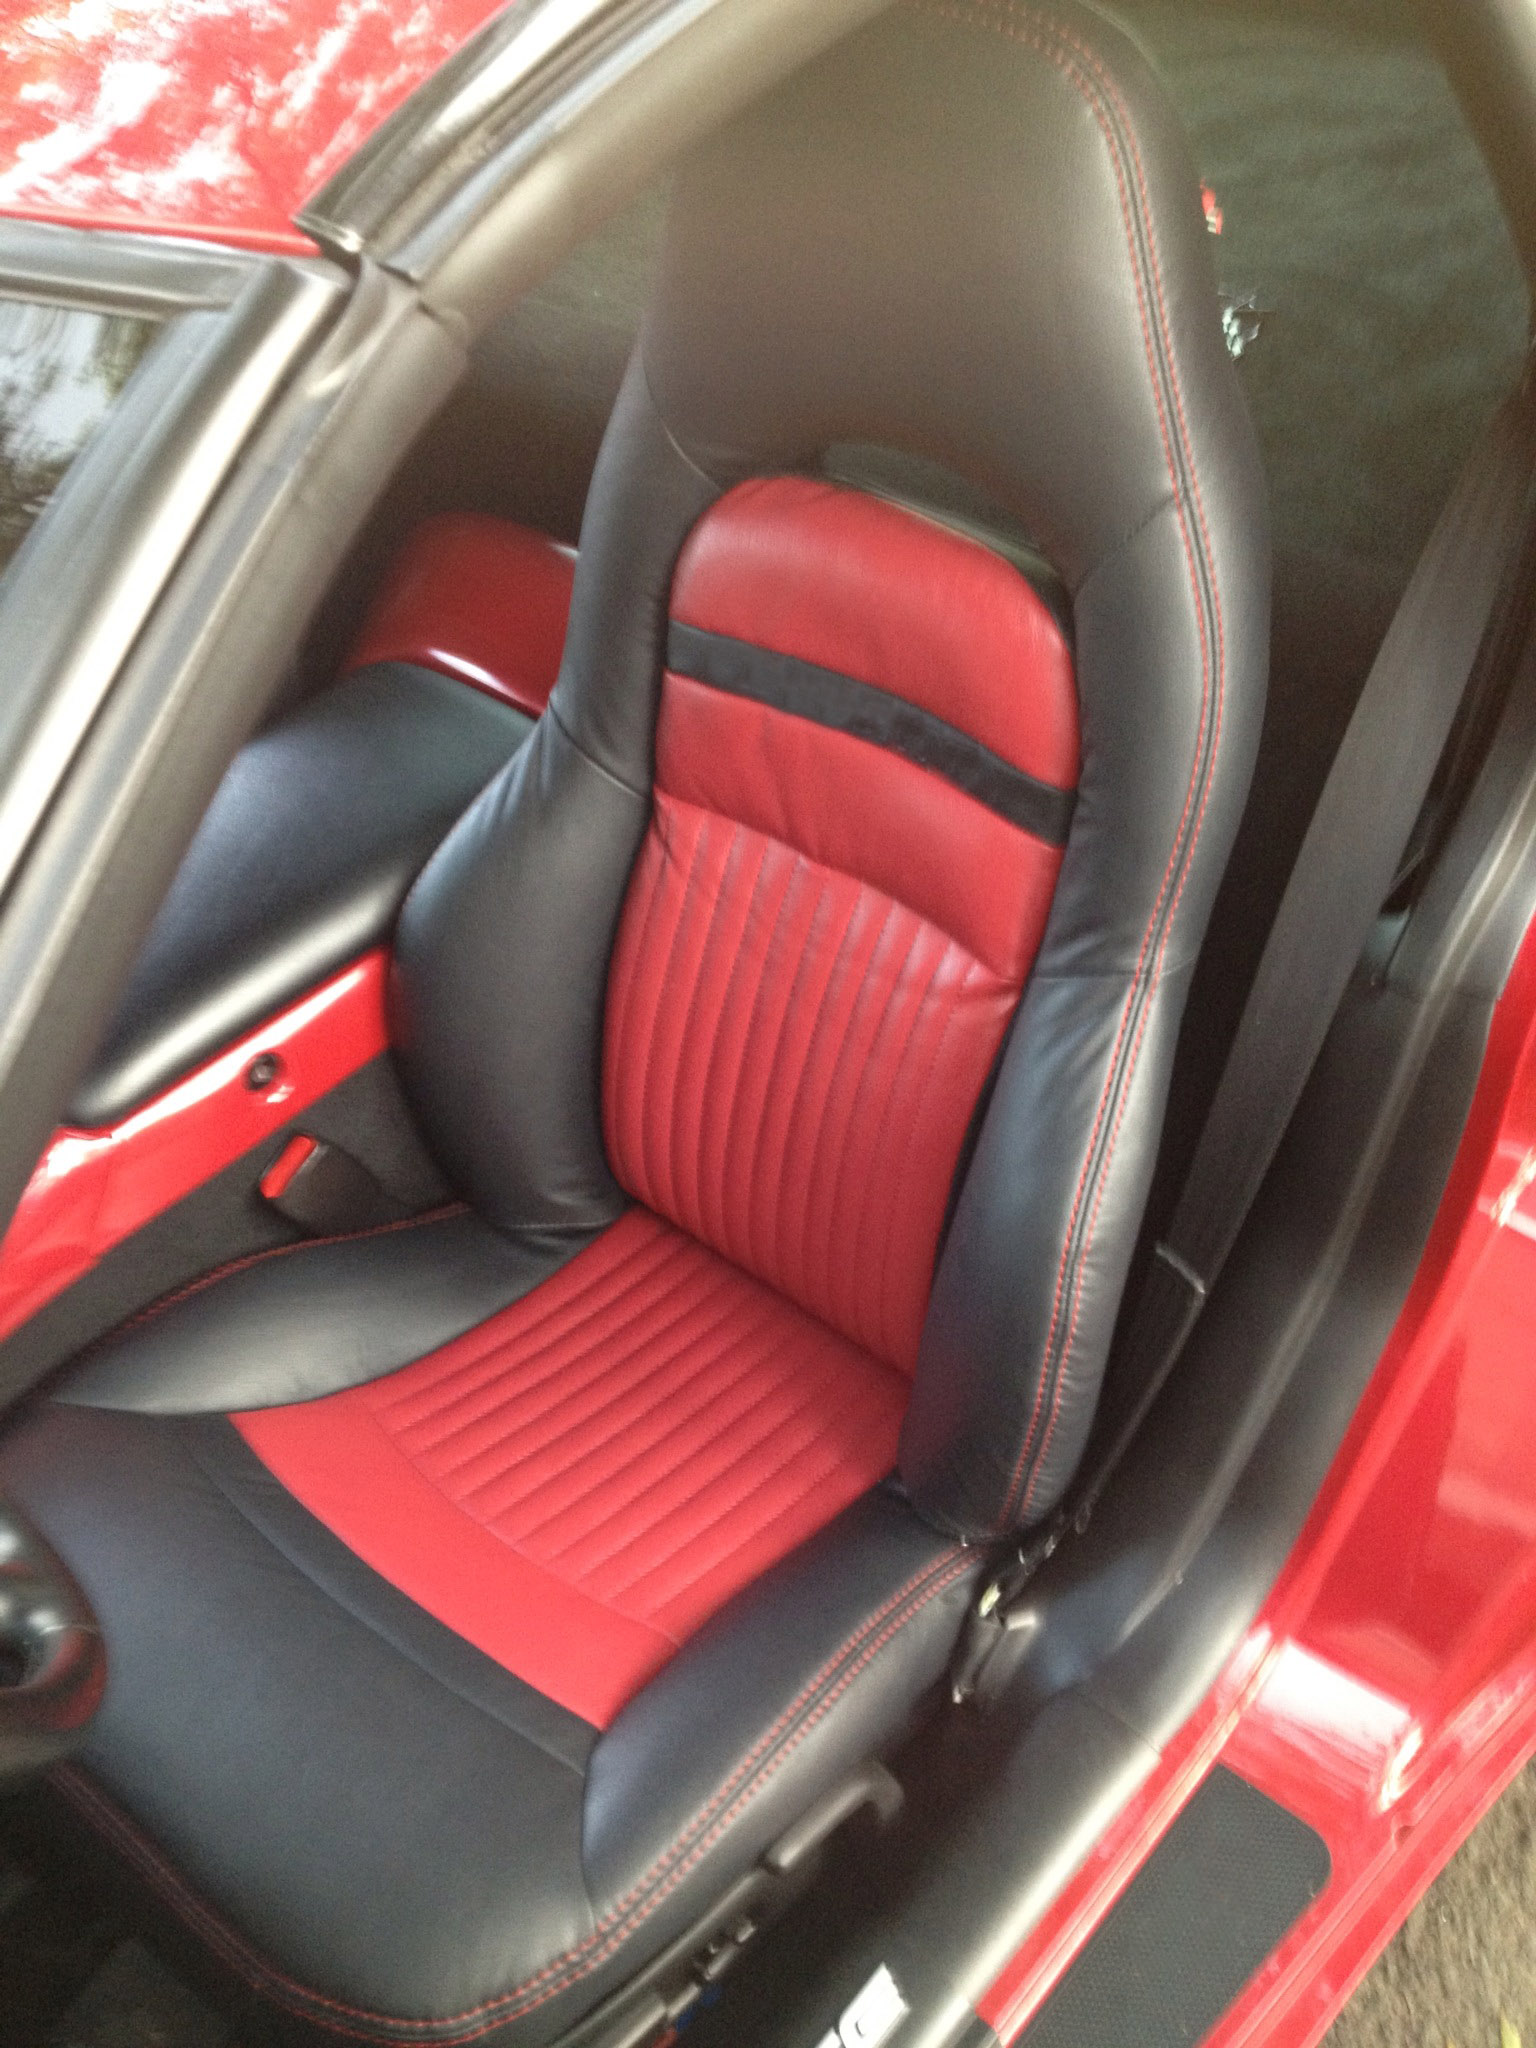 1997 2004 C5 Corvette Synthetic Leather Seat Covers Blackfirethorn